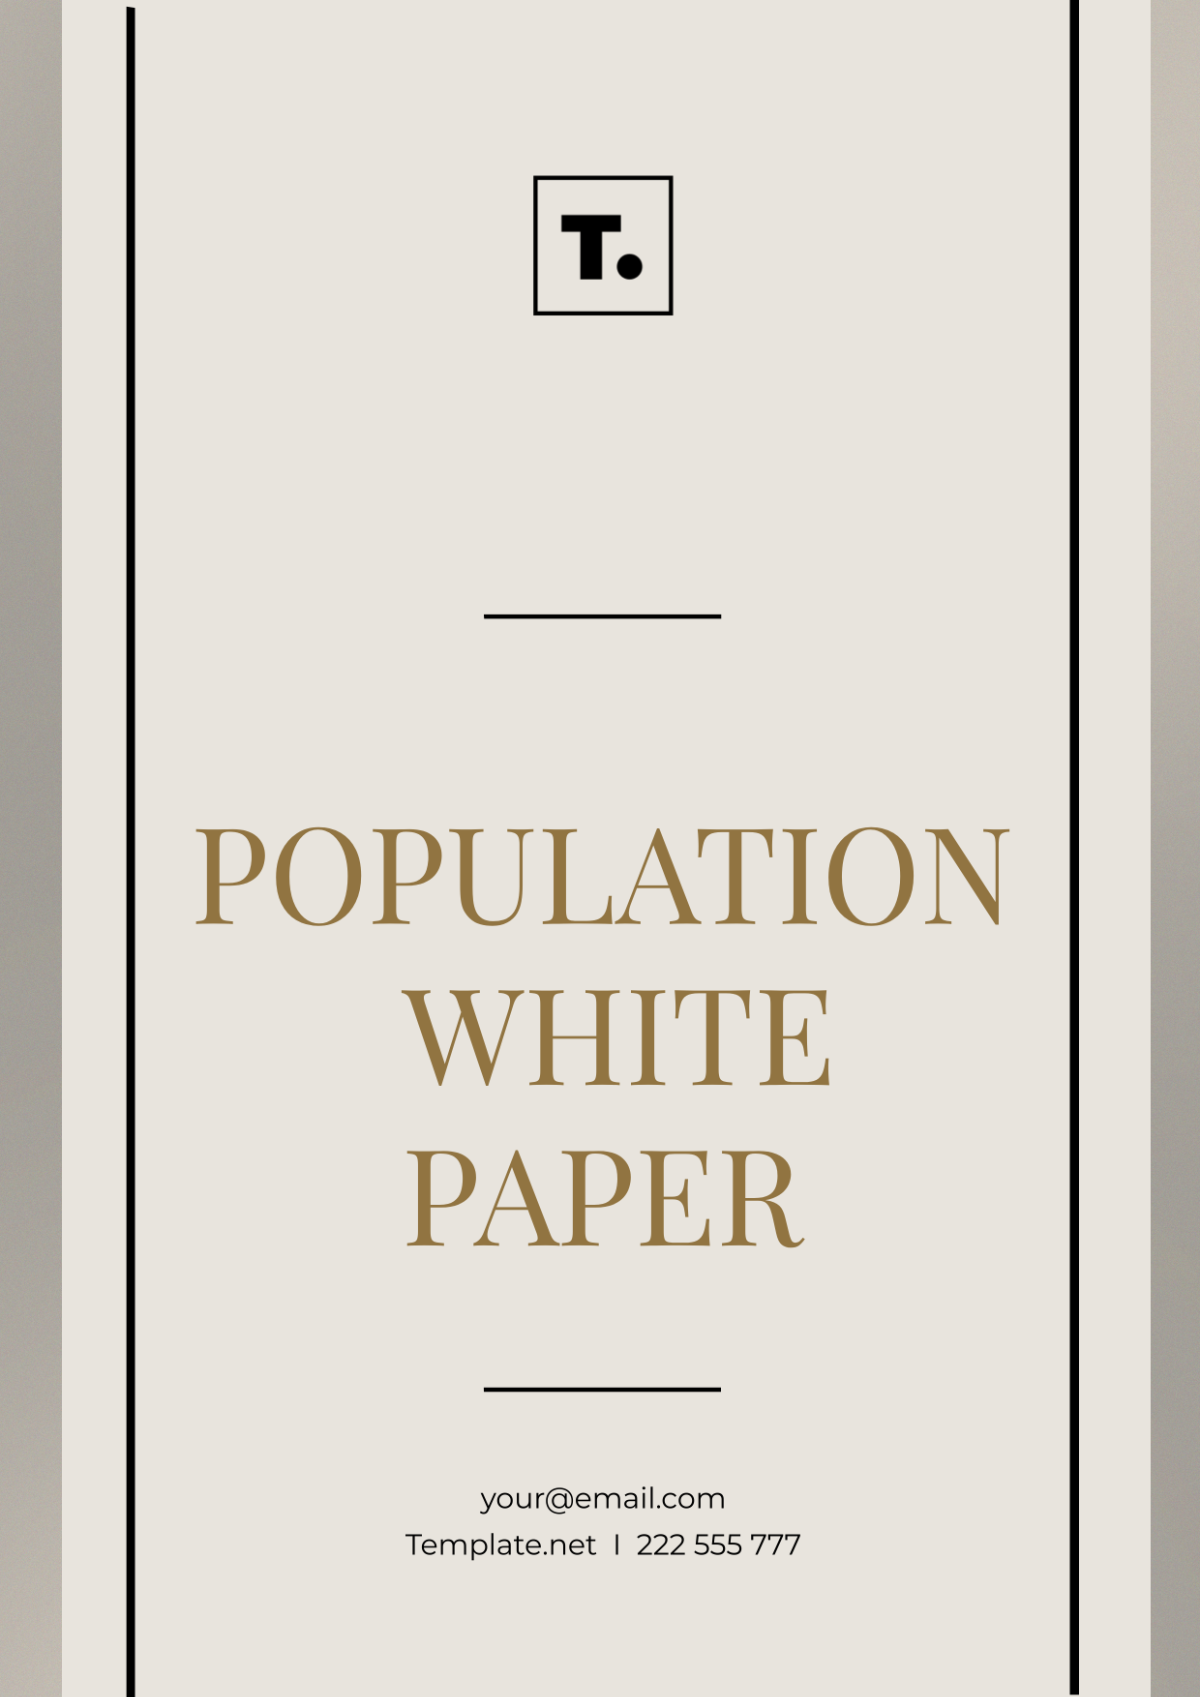 Population White Paper Template